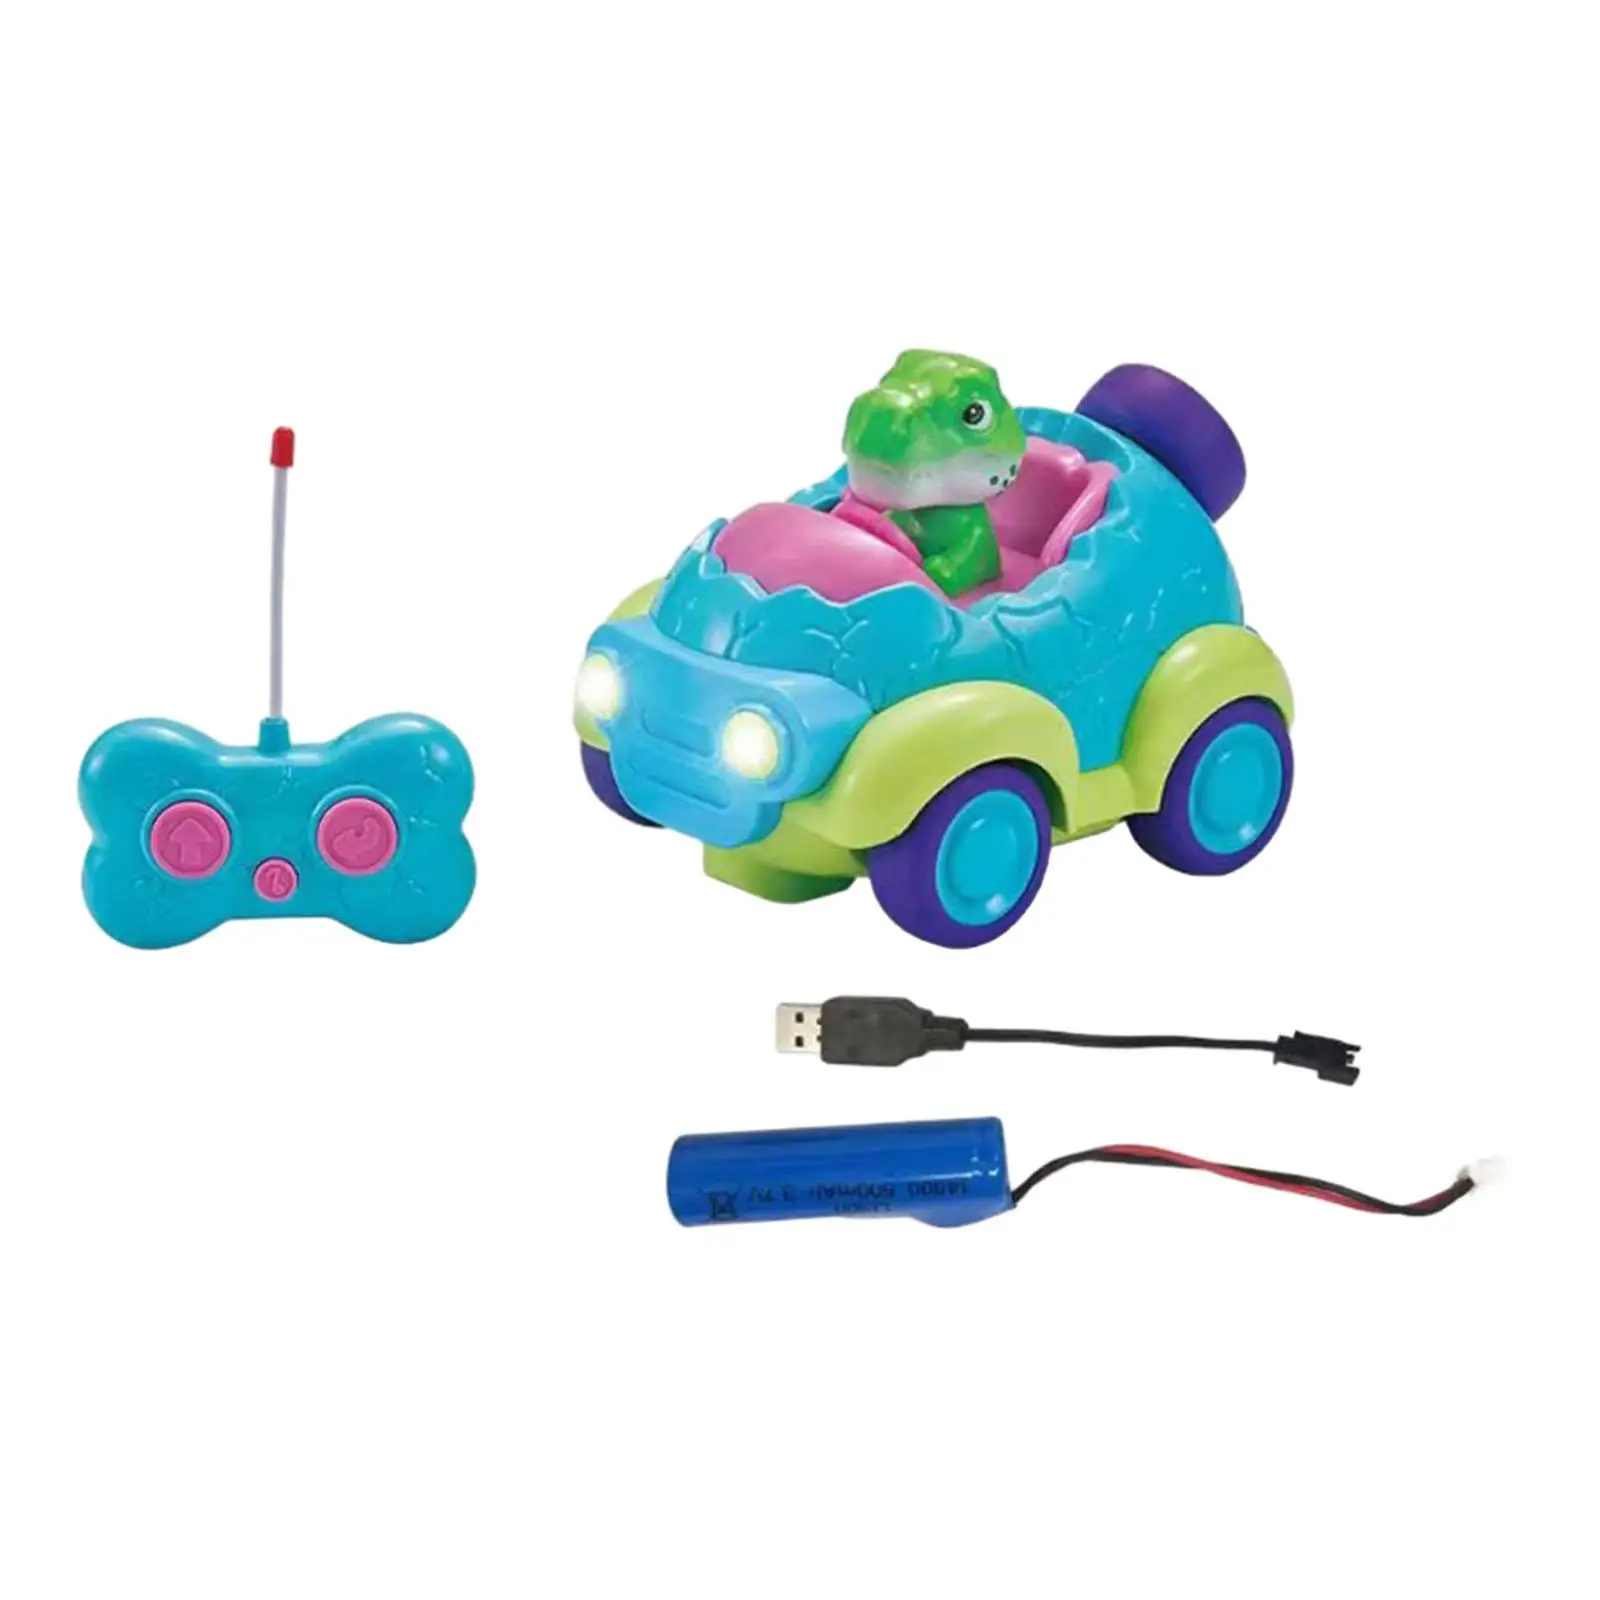 Dino Remote Control Car Dinosaur Toys with LED Light and Music Lightweight Durable Remote Control Car Toys for Kids Children